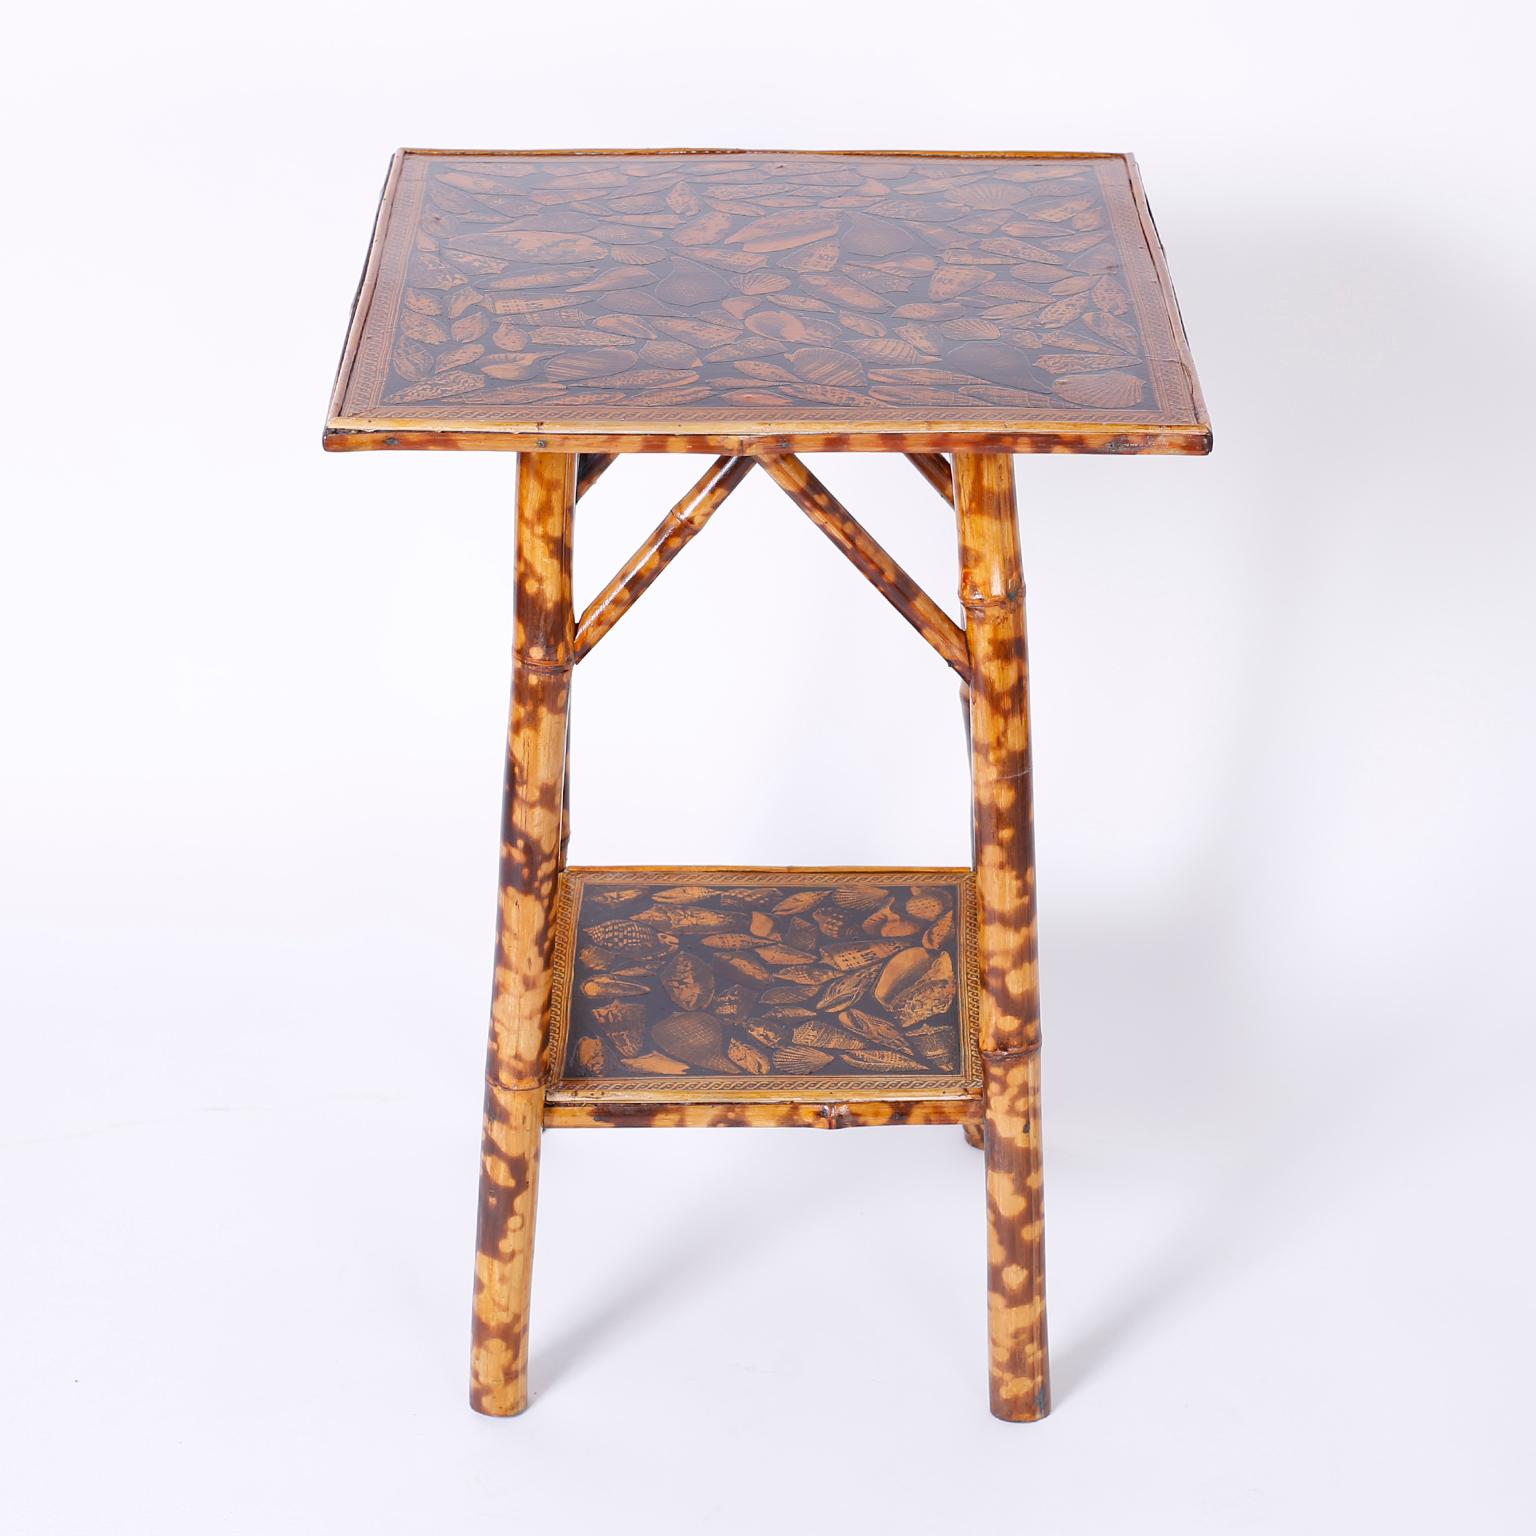 Victorian Pair of Bamboo Tables with Seashell Decoupage Tops